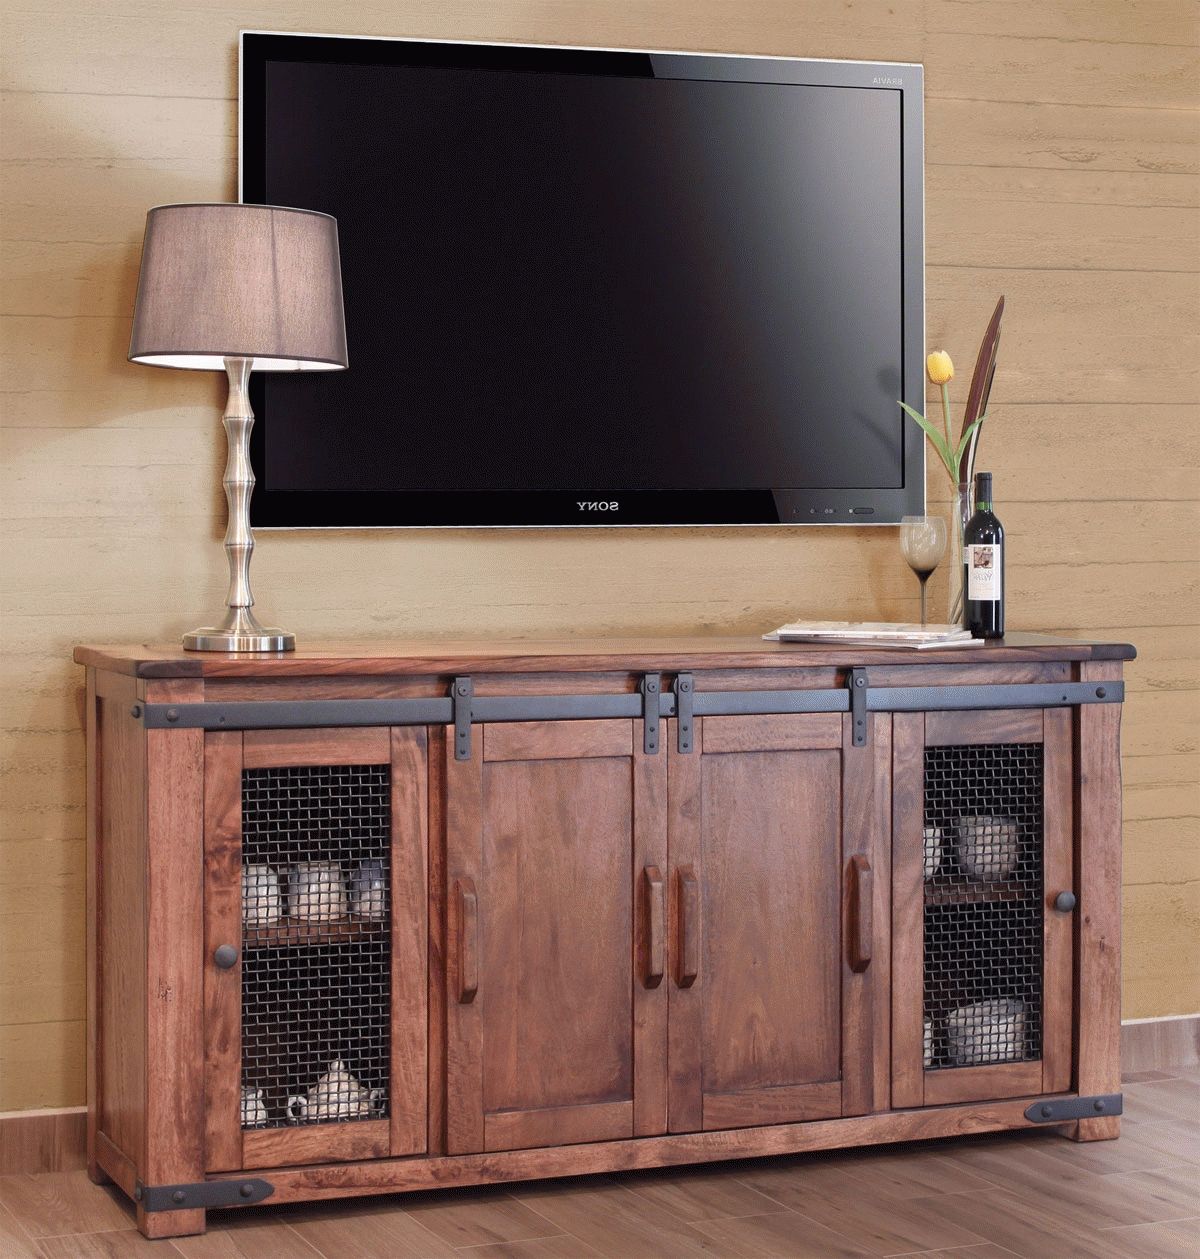 Rustic Tv Stand, Wood Tv Stand, Pine Tv Stand Regarding Pine Tv Stands (Gallery 7 of 20)